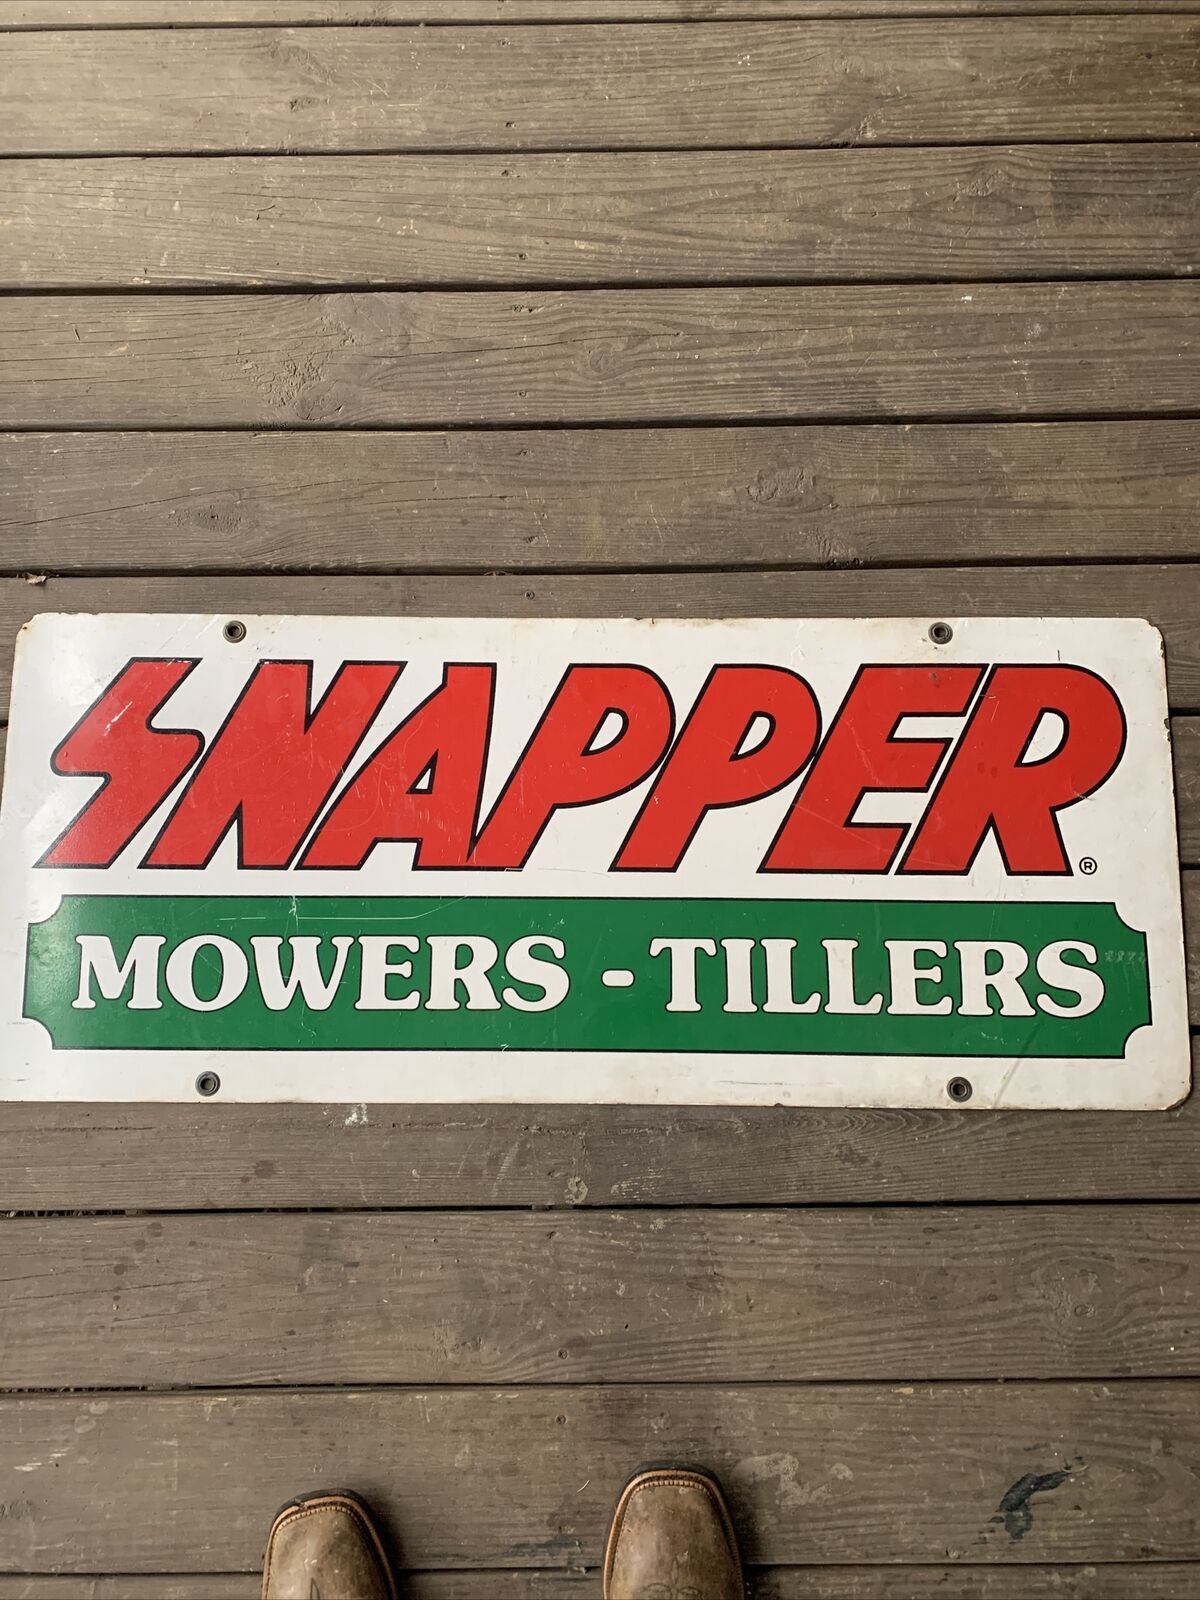 Rare Vintage Double Sided Snapper Mowers Tillers Sign 17.5/42”